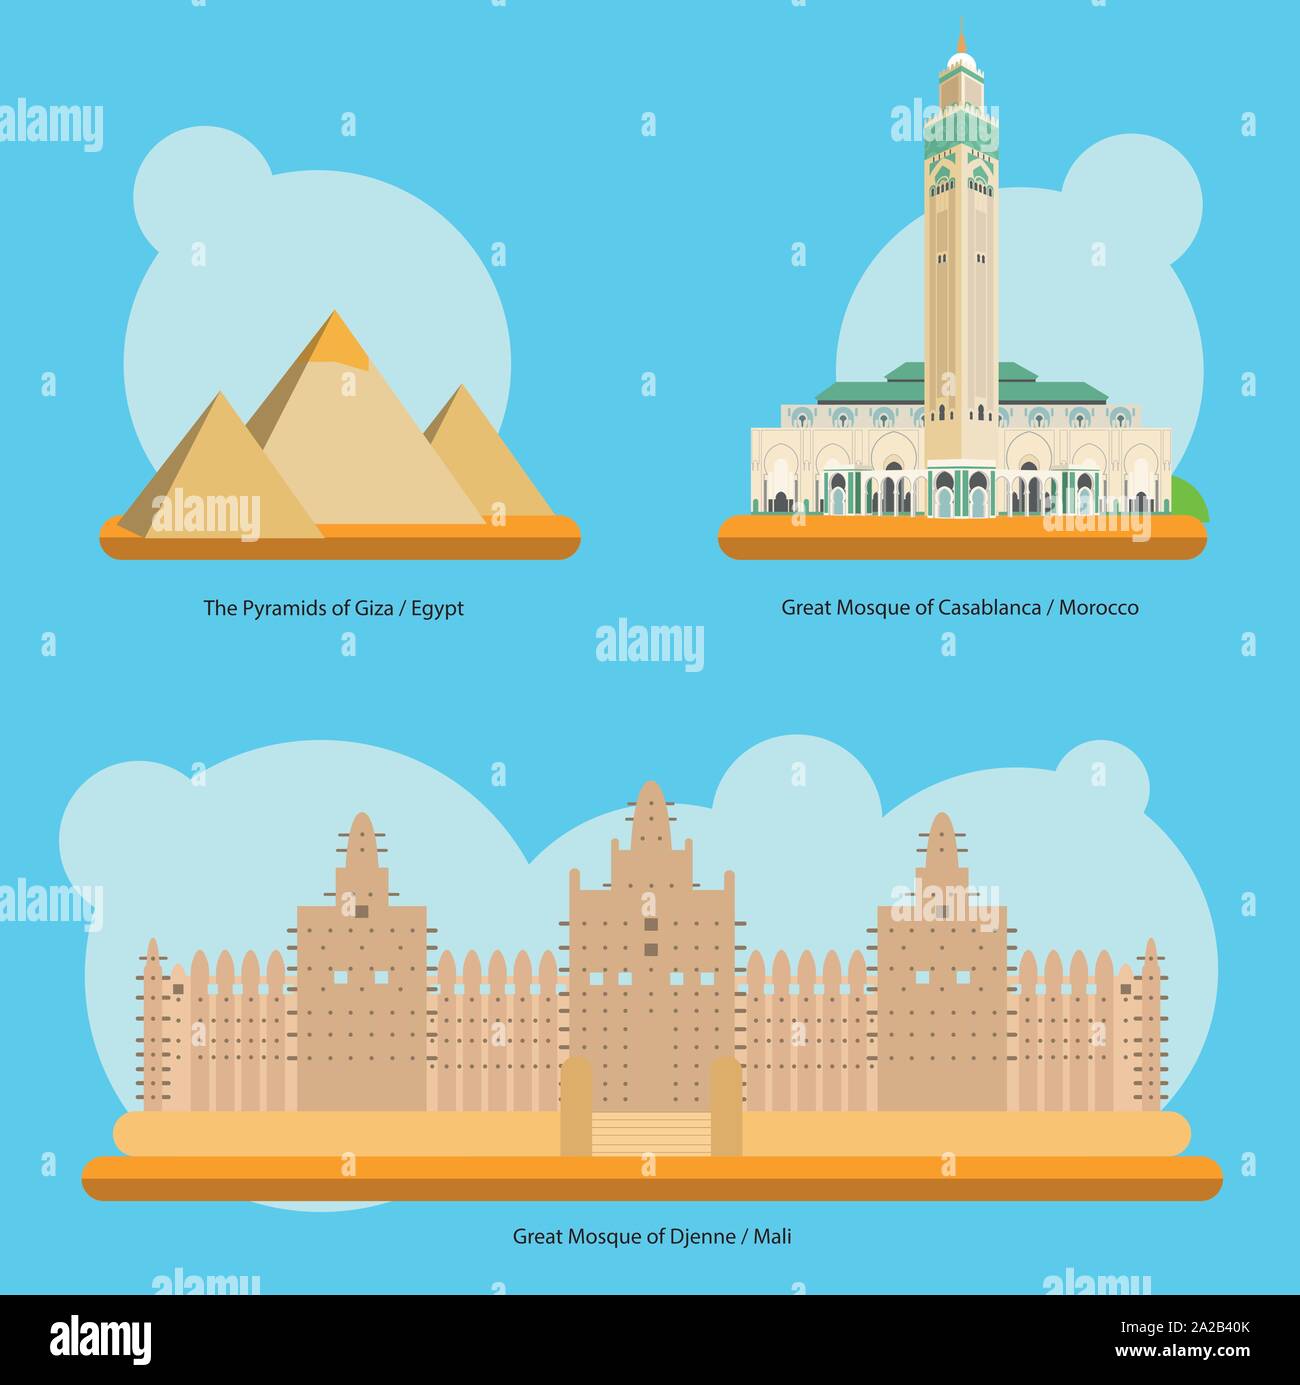 Vector illustration of Monuments and landmarks in Africa Vol. 1: The Pyramids of Giza, Great Mosque of Casablanca and Great Mosque of Djenne Stock Vector